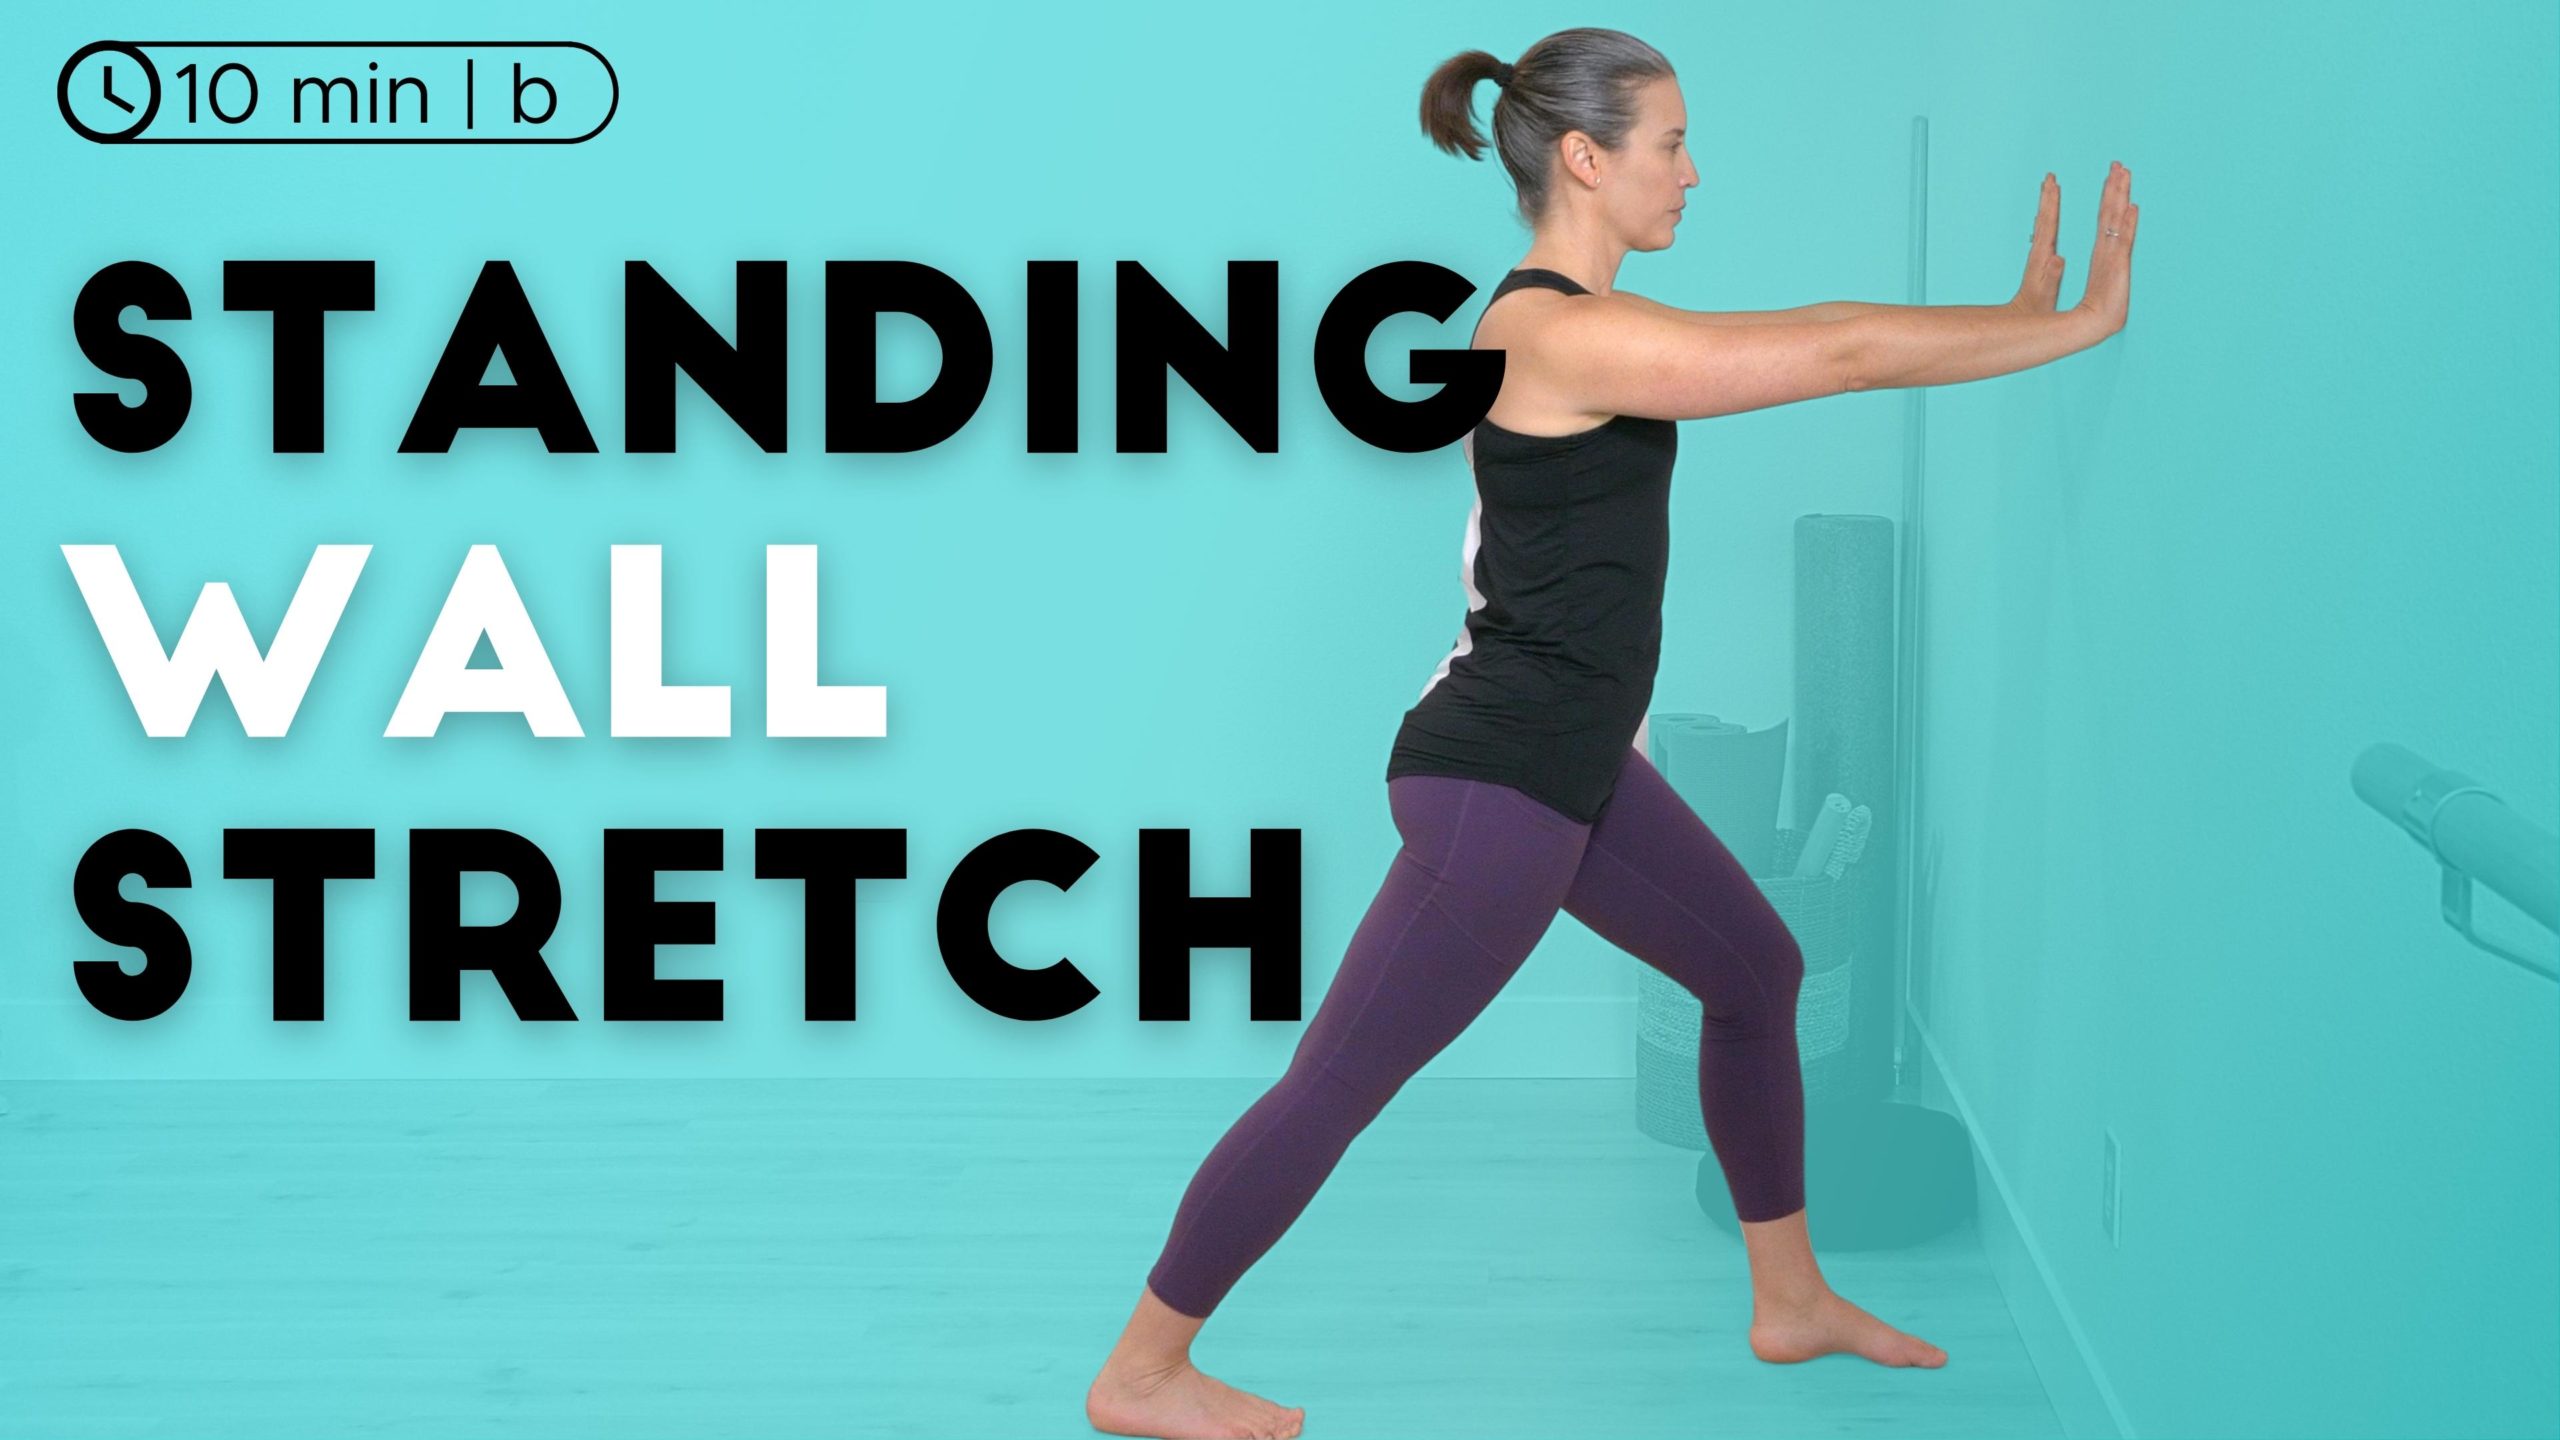 Standing Wall Stretches